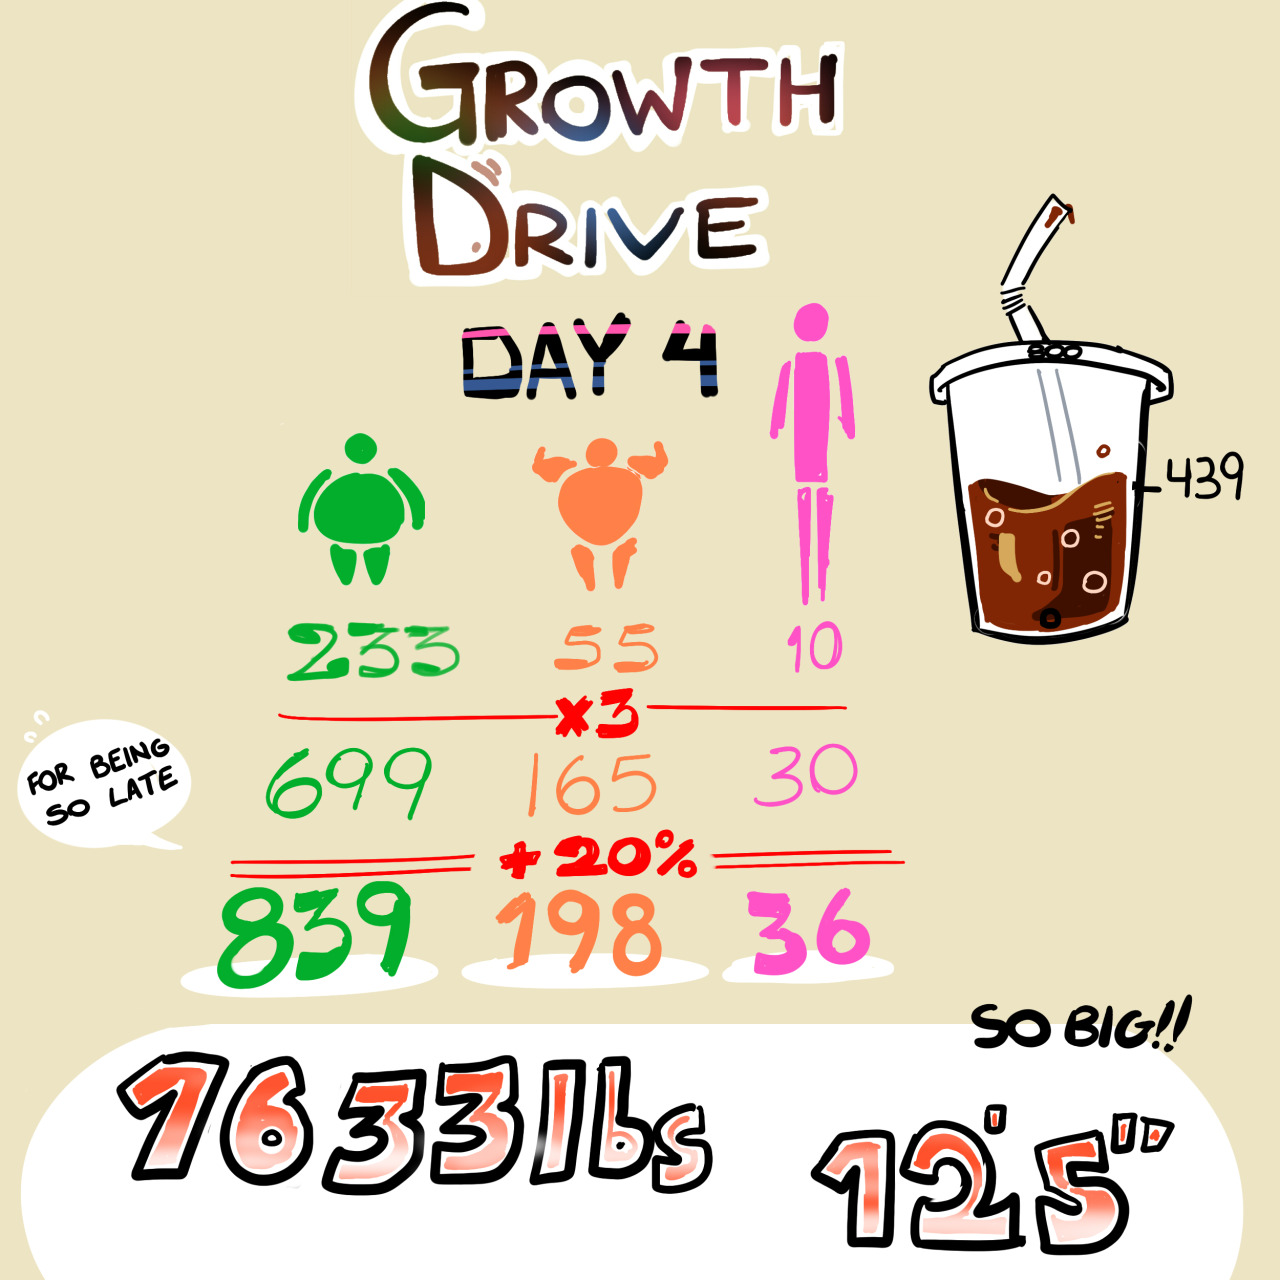 happymondayman:  Growth Drive - Day 4 (1)   it’s finally here!!and boy he sure